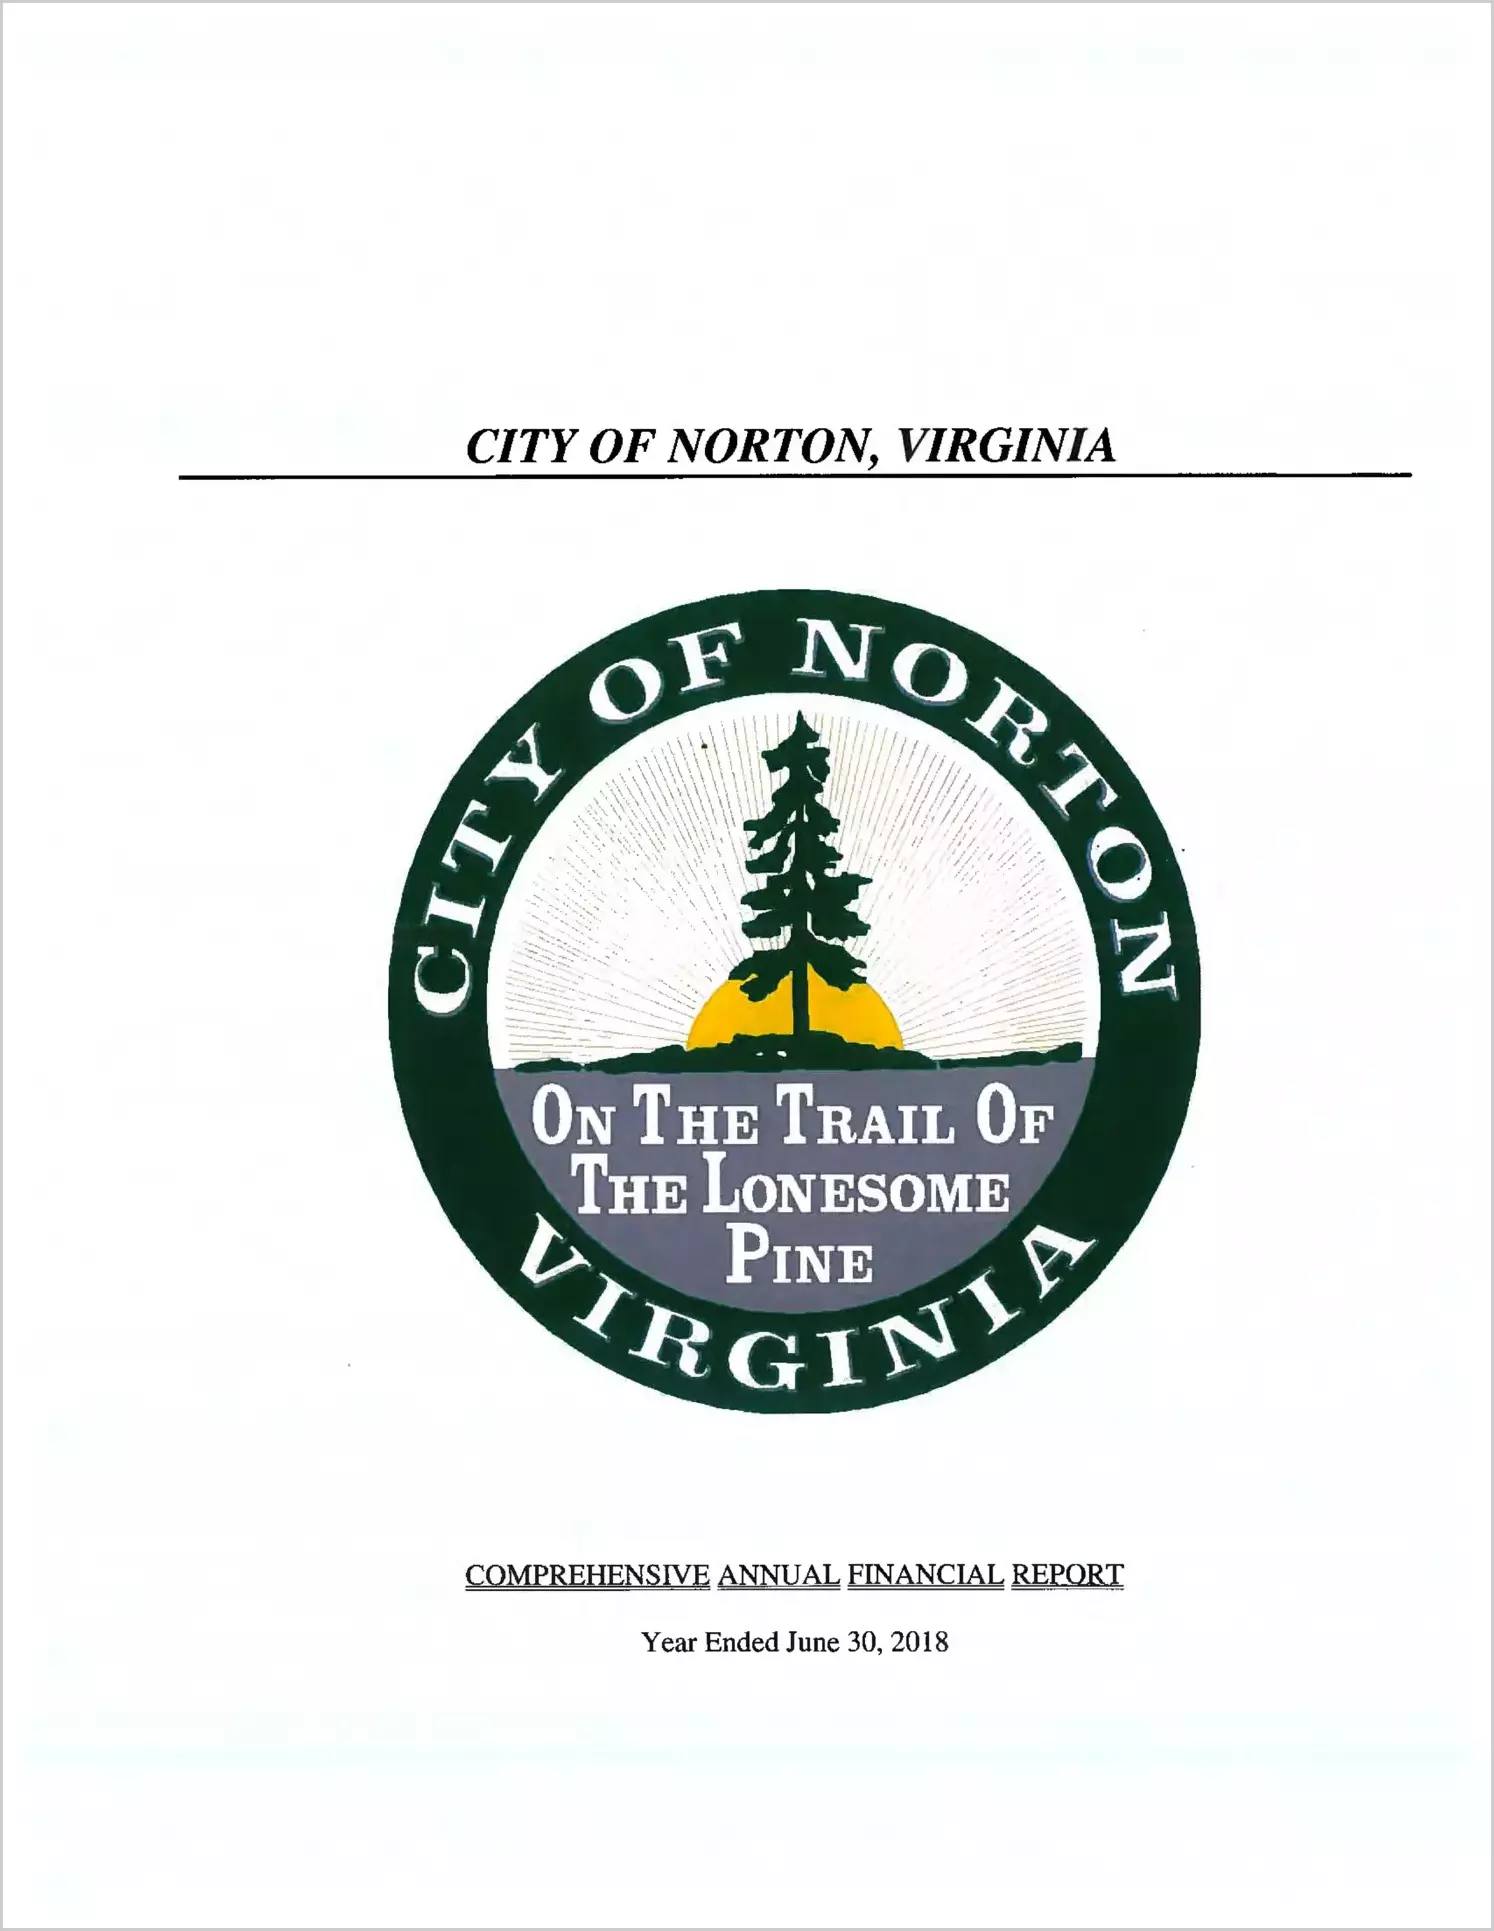 2018 Annual Financial Report for City of Norton